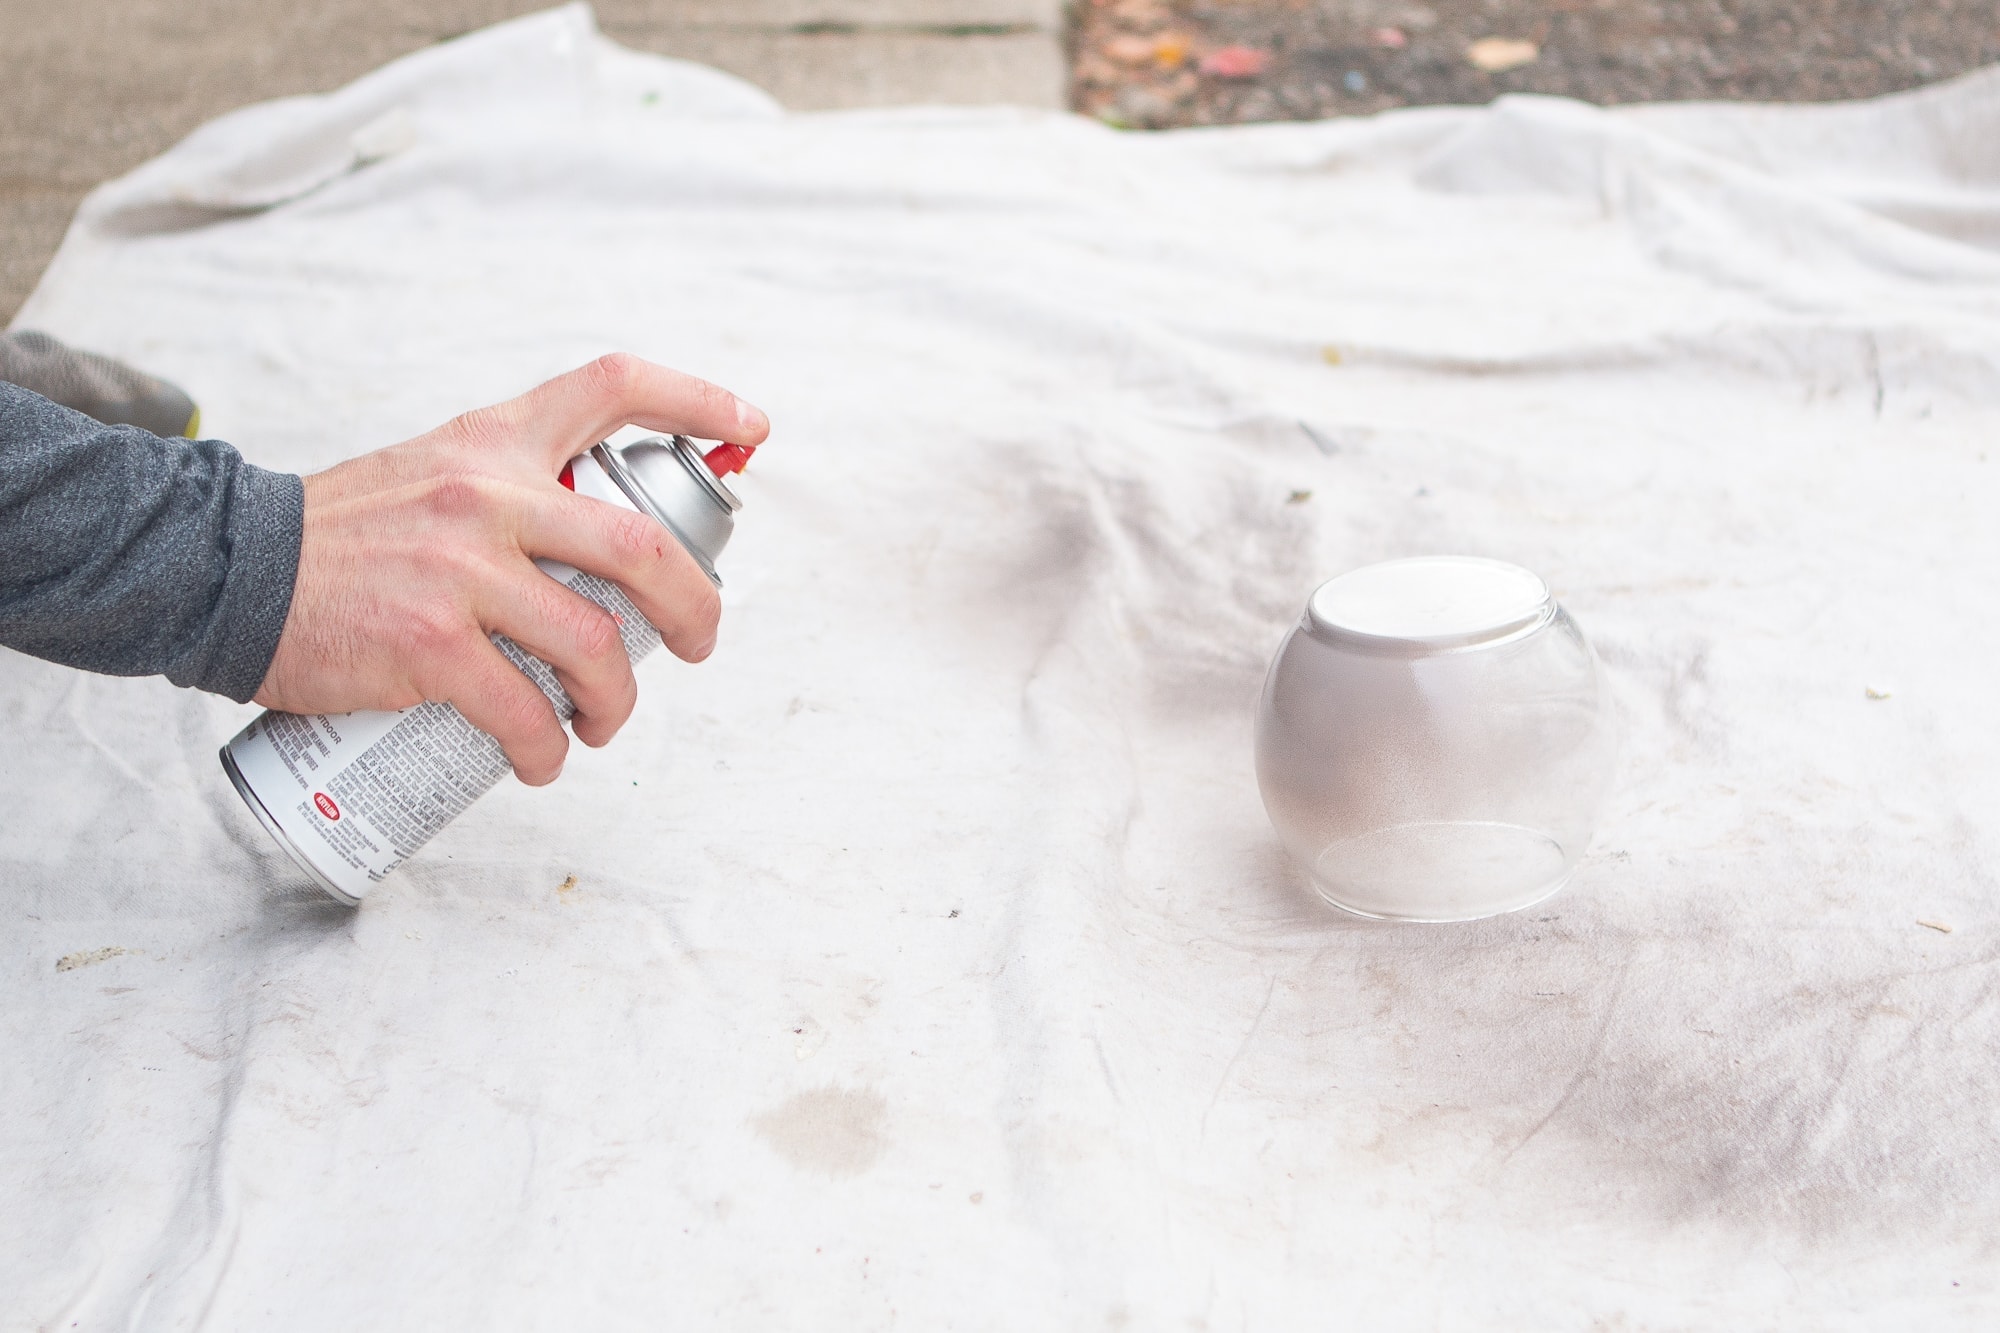 One of my favorite beginner DIY projects is spray painting old vases so they look like new!